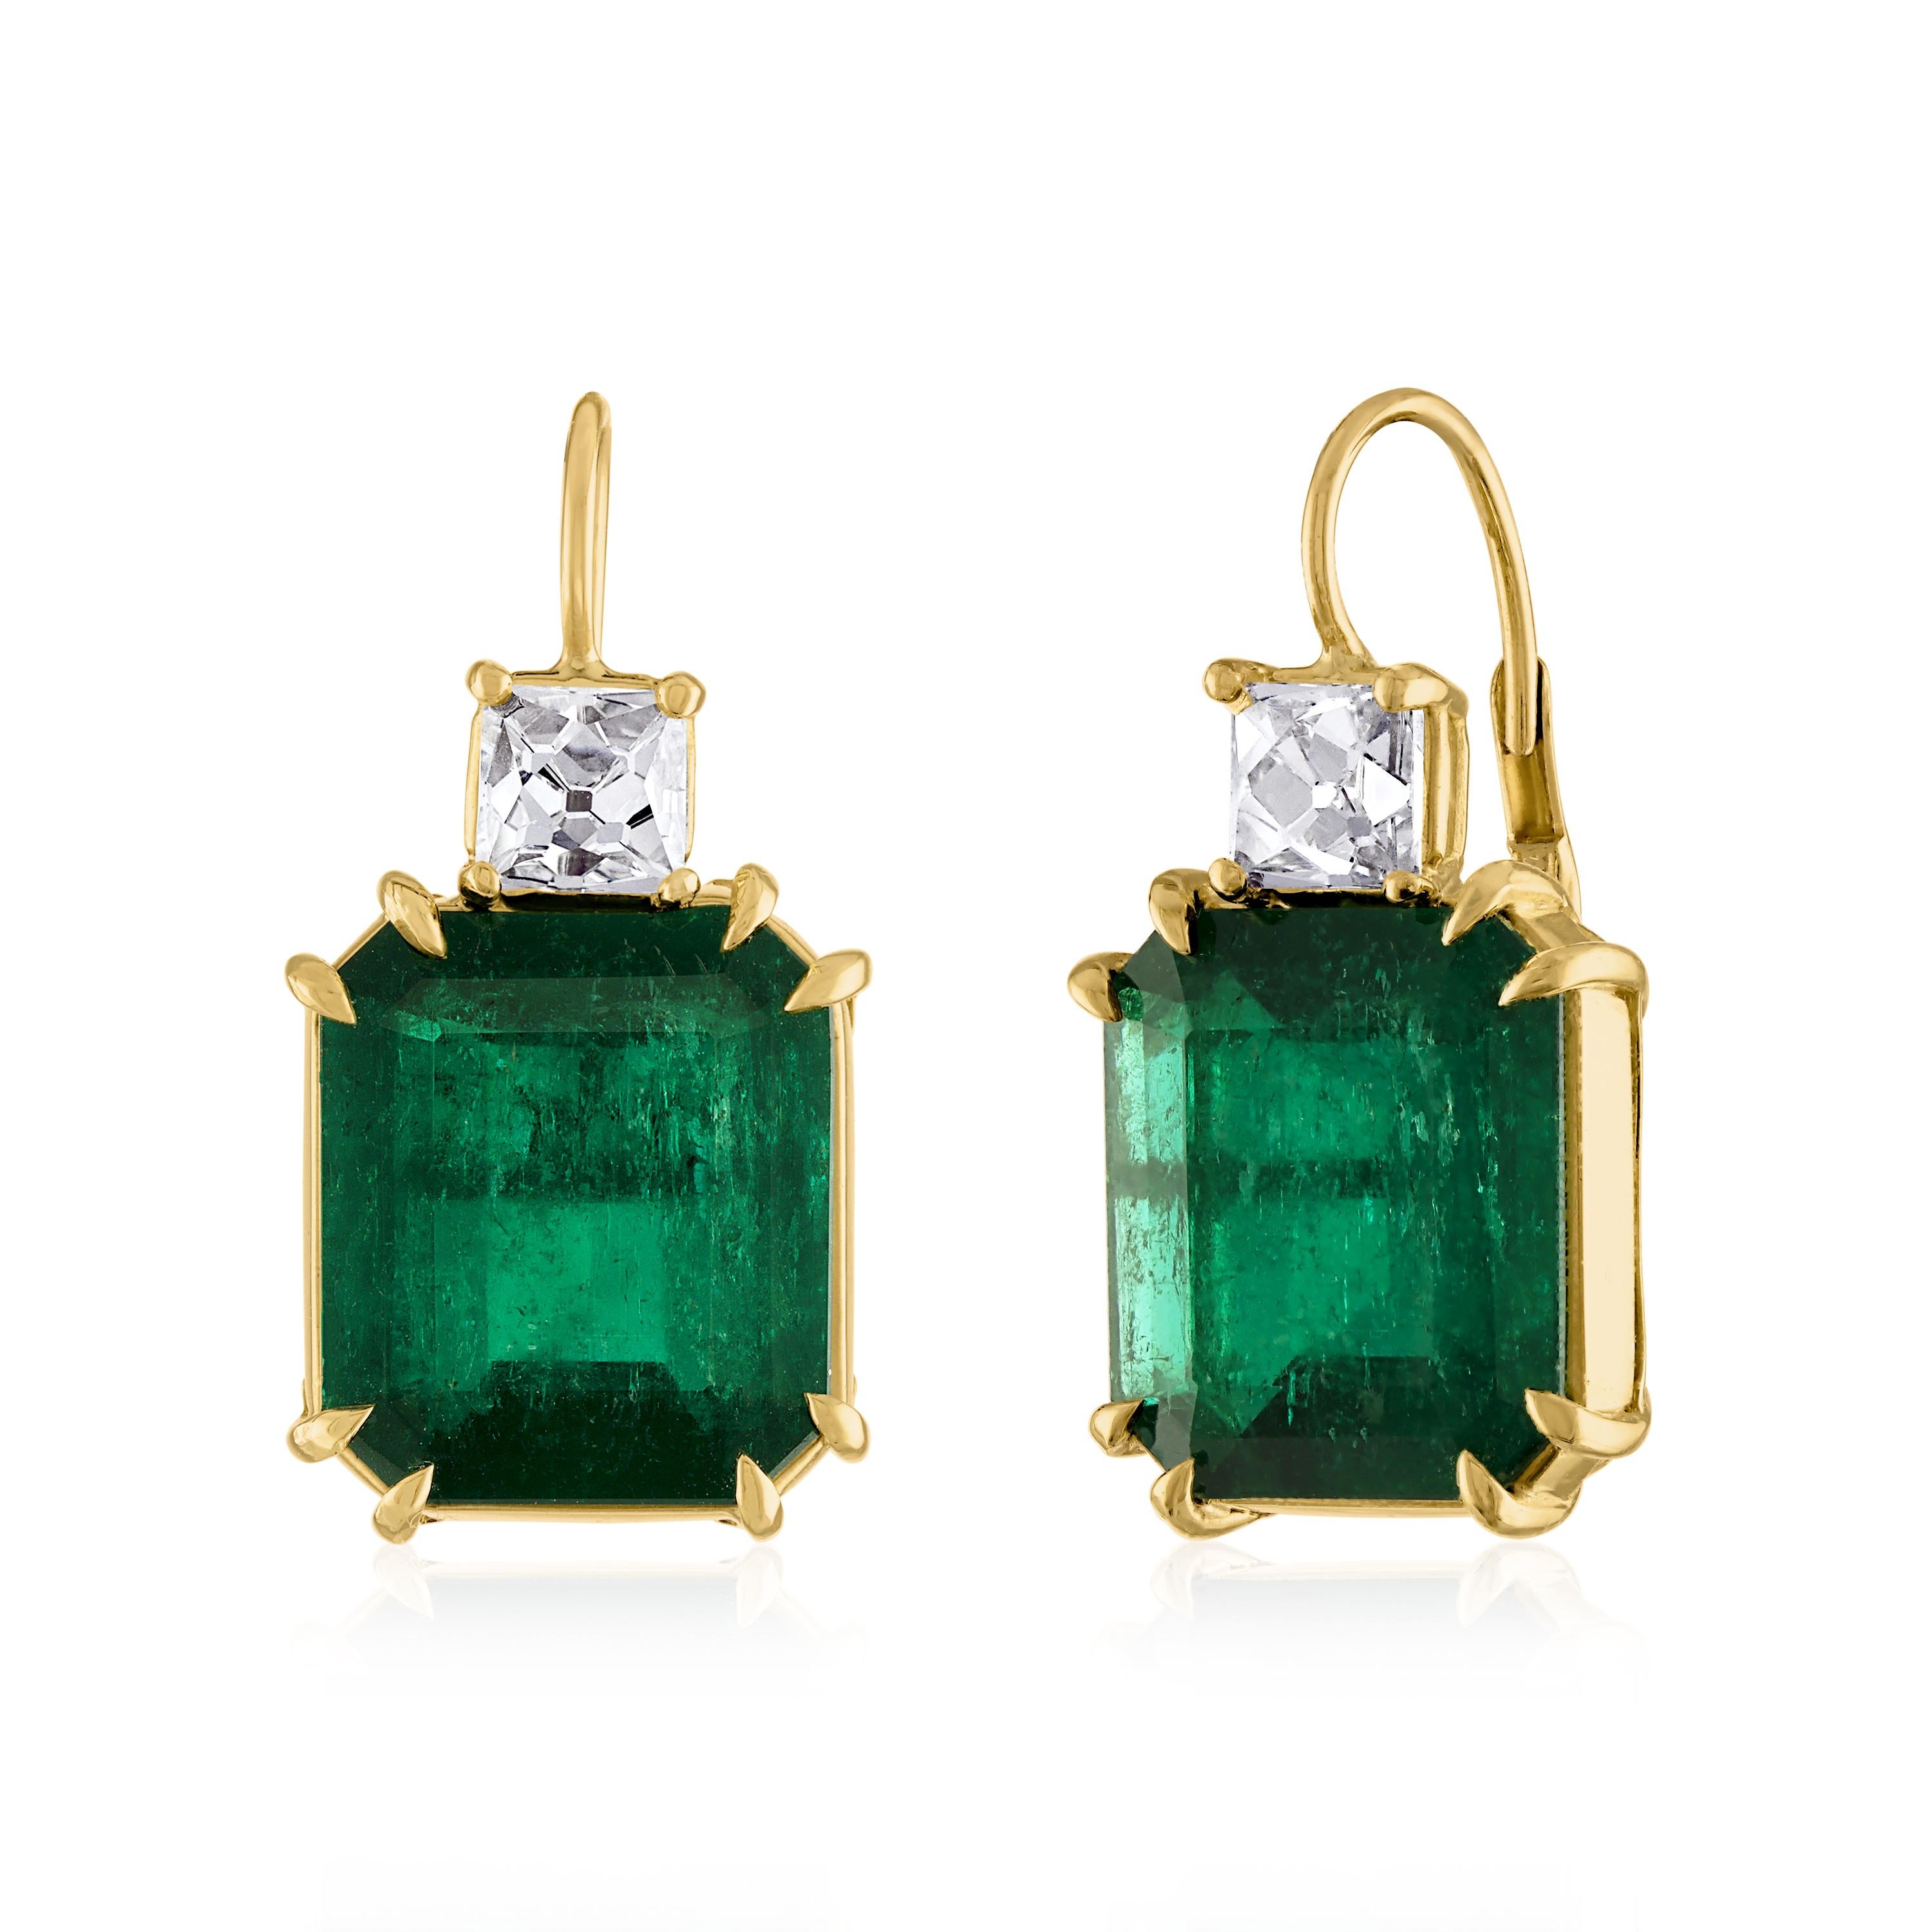 Emerald and French cut diamonds are a favorite combination at MMNY. These custom large drops are a true heirloom purchase. 
Two Colombian Emeralds 19.50 CTW and two French Cut Diamonds 2.15 CTW, set in 18k Yellow Gold. Lever back.